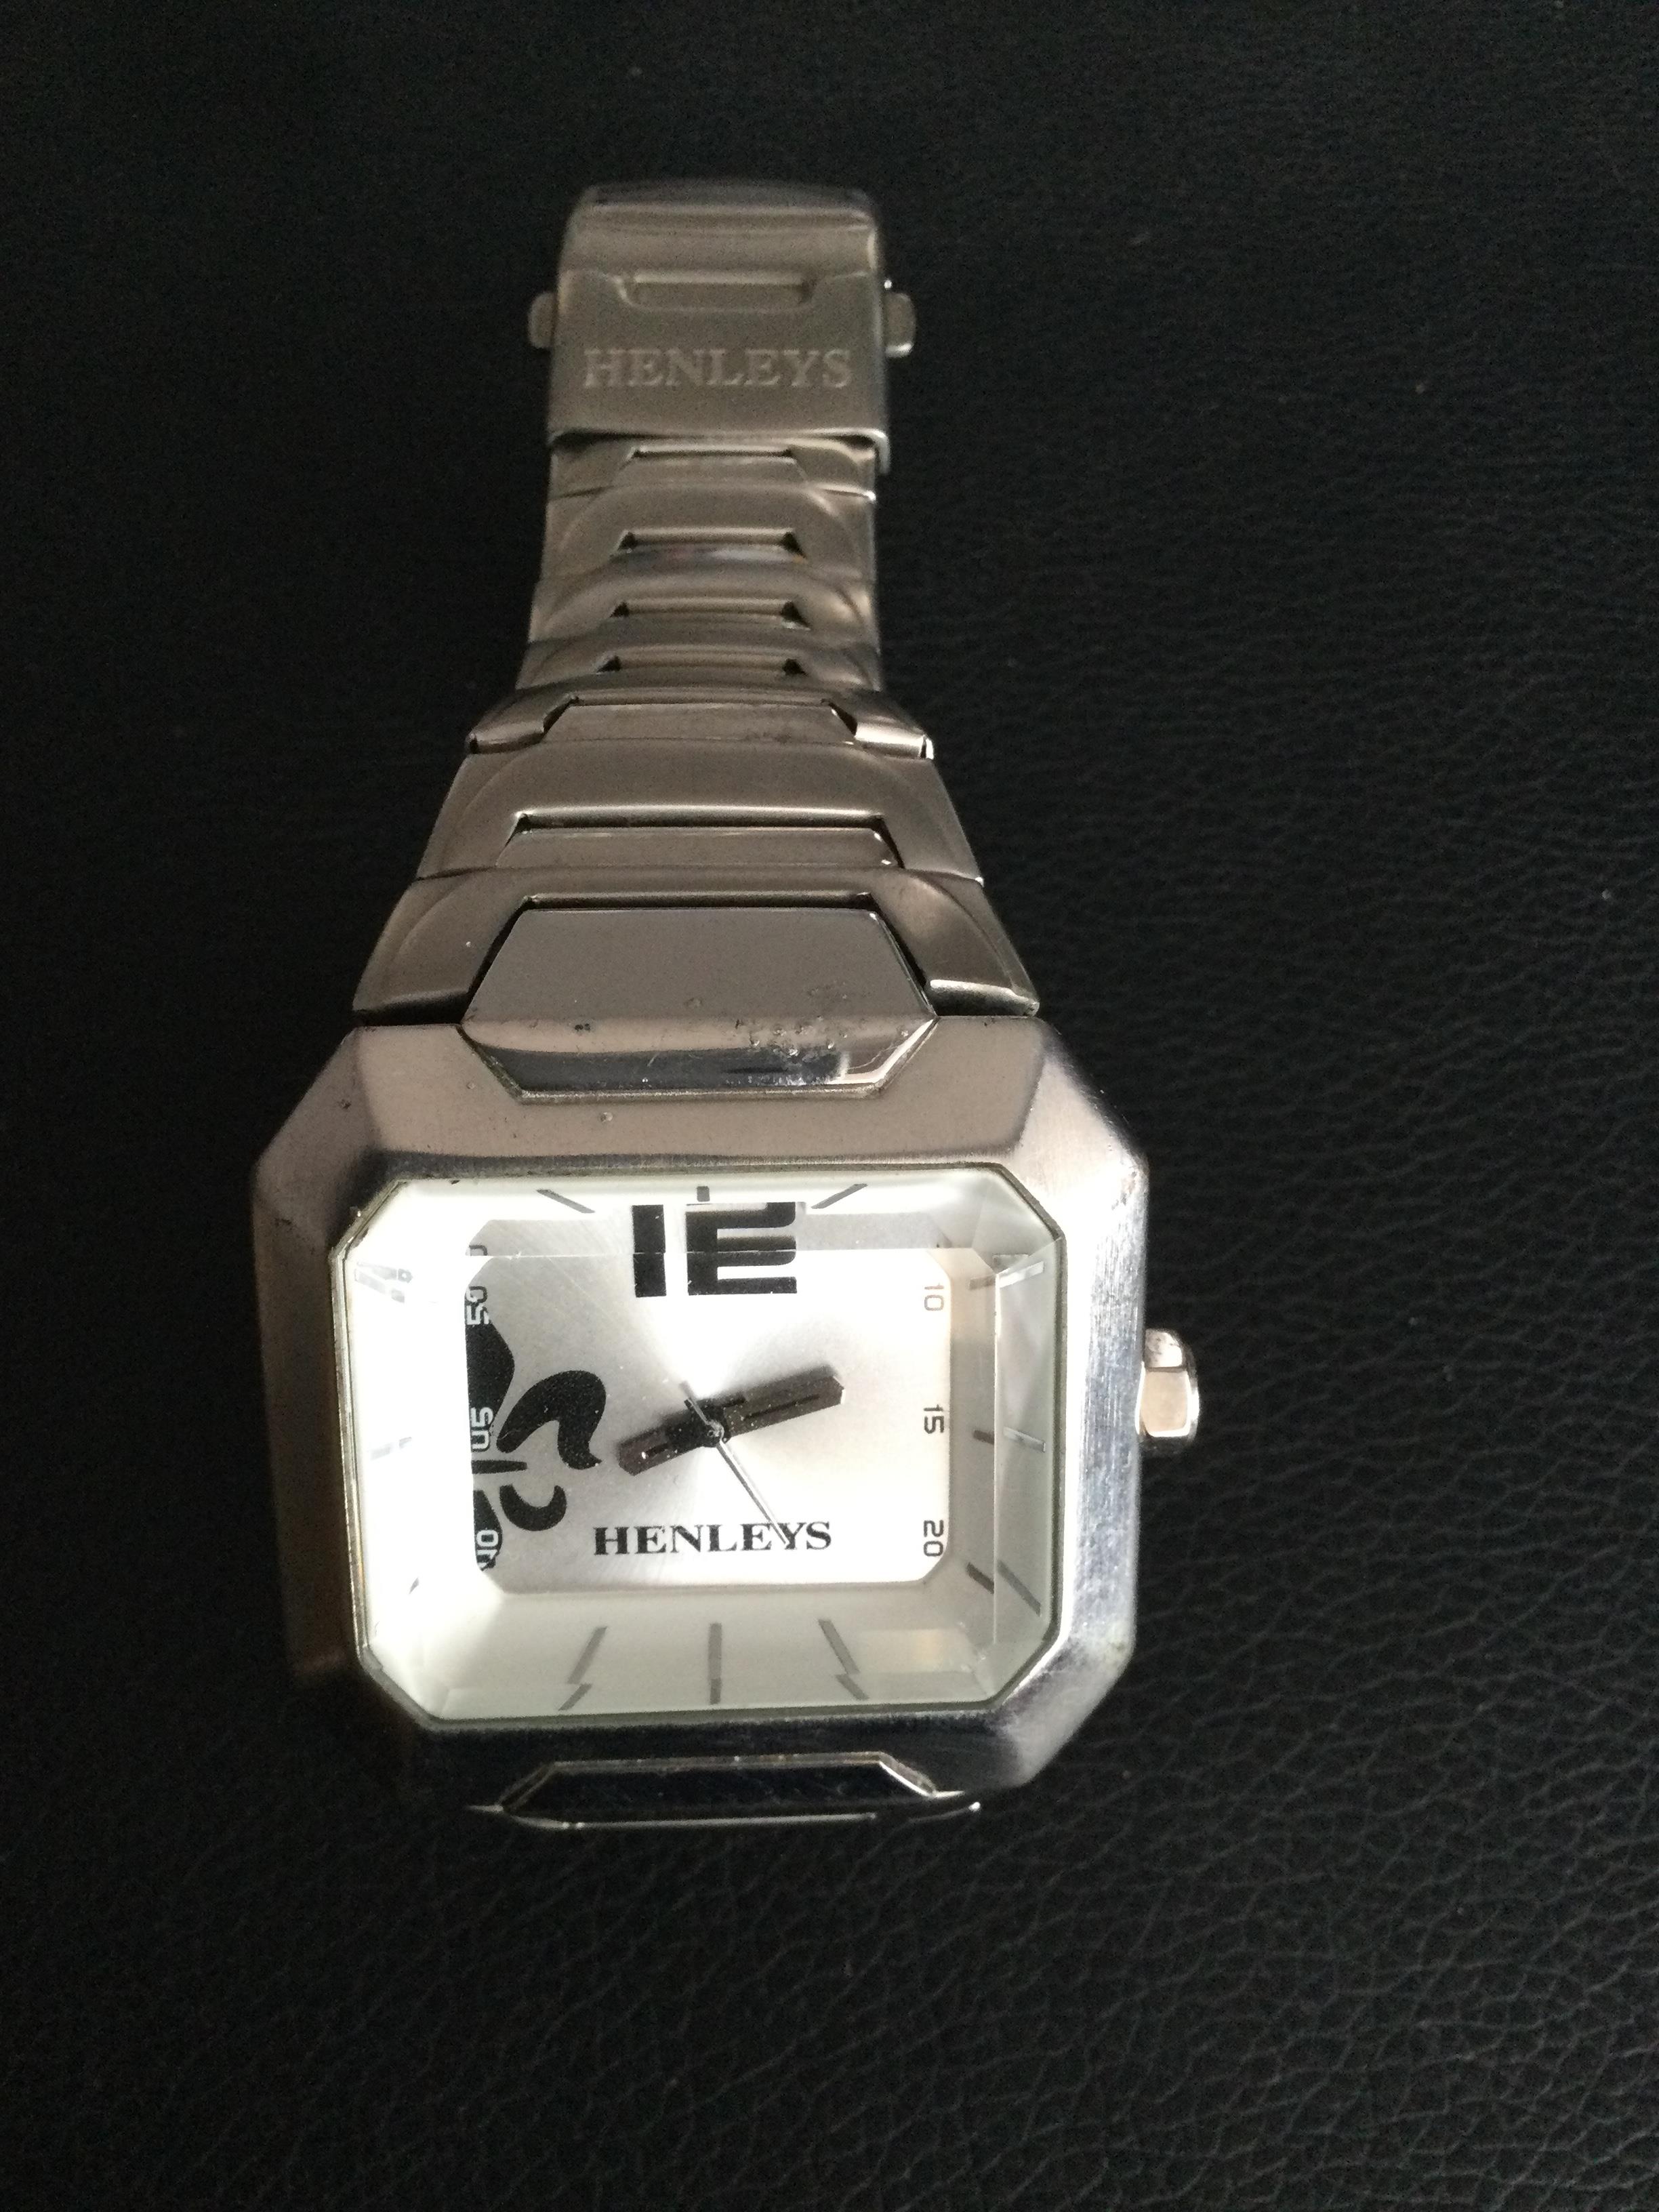 Henley Gents Wristwatch (GS42) A large Gents Henley's Wristwatch in Excellent Condition. The